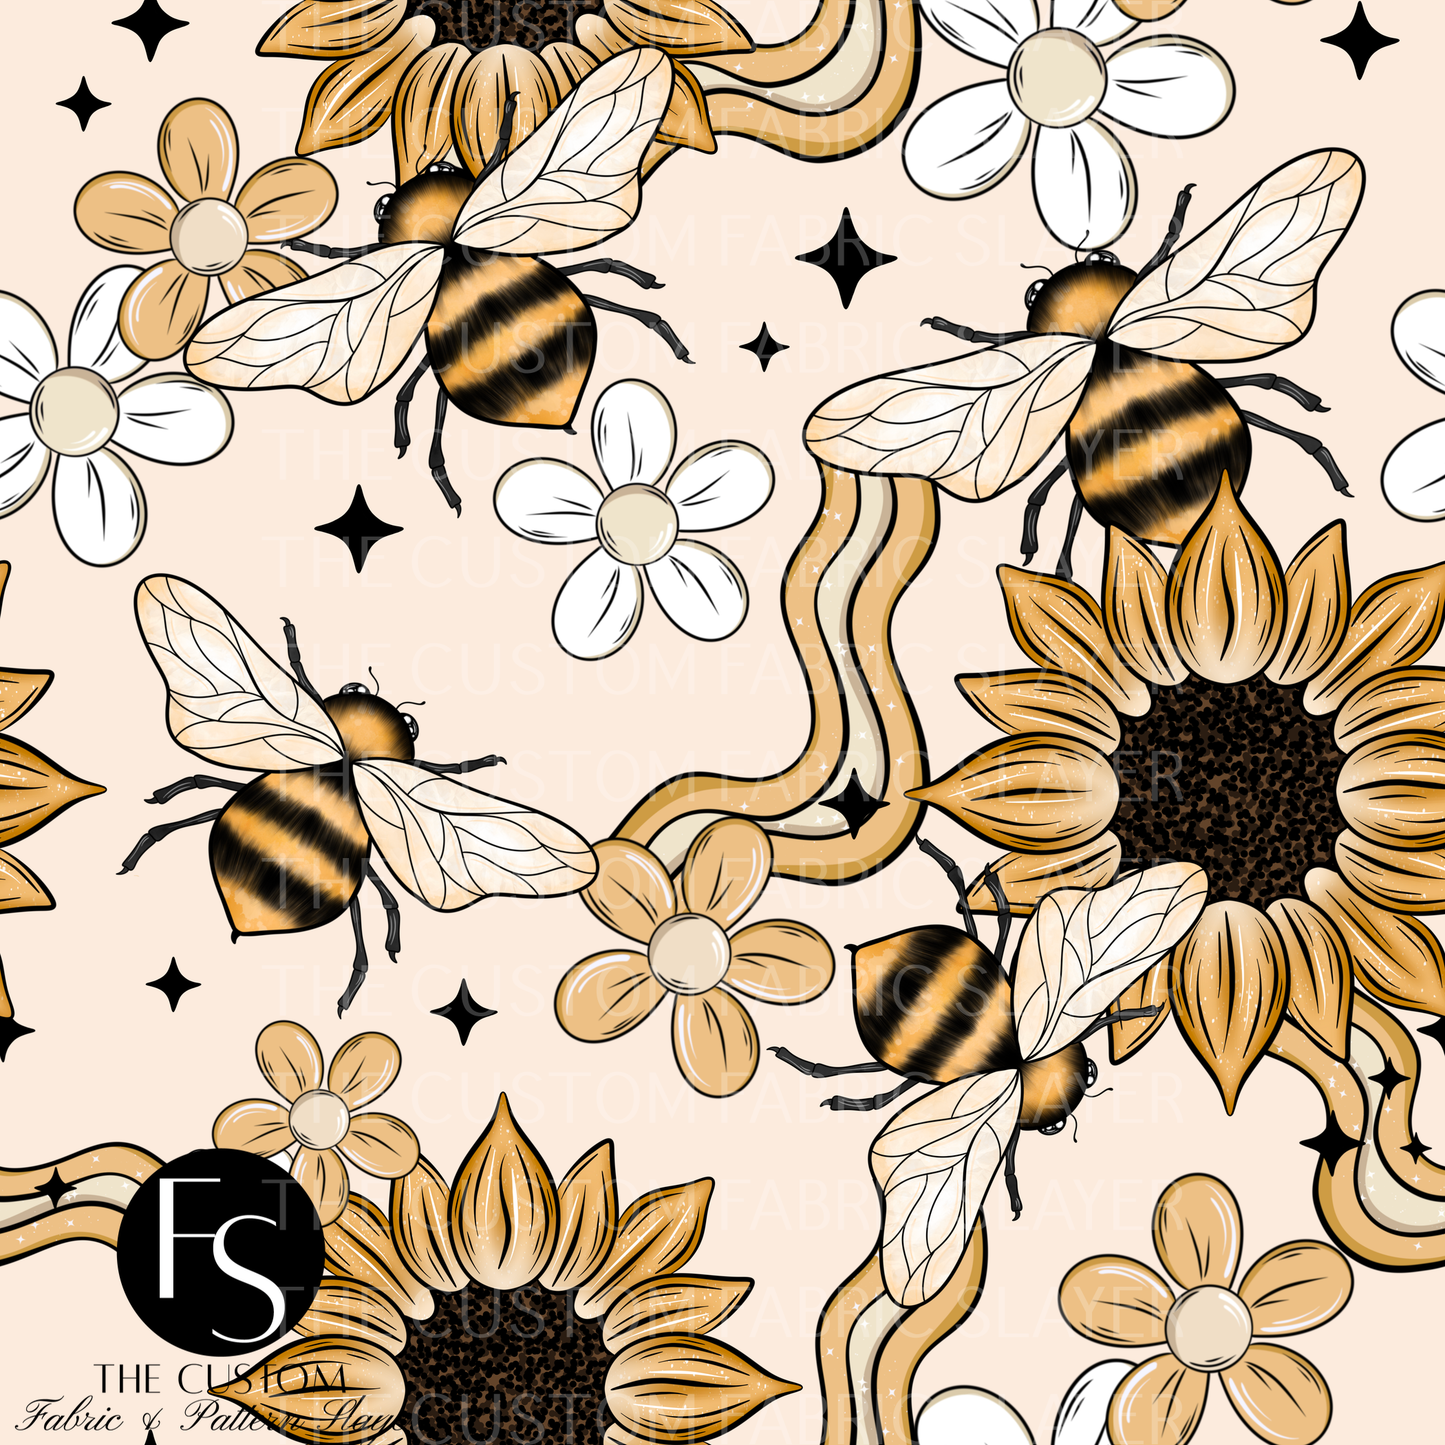 Sunflowers and bees - CERRASSHOP